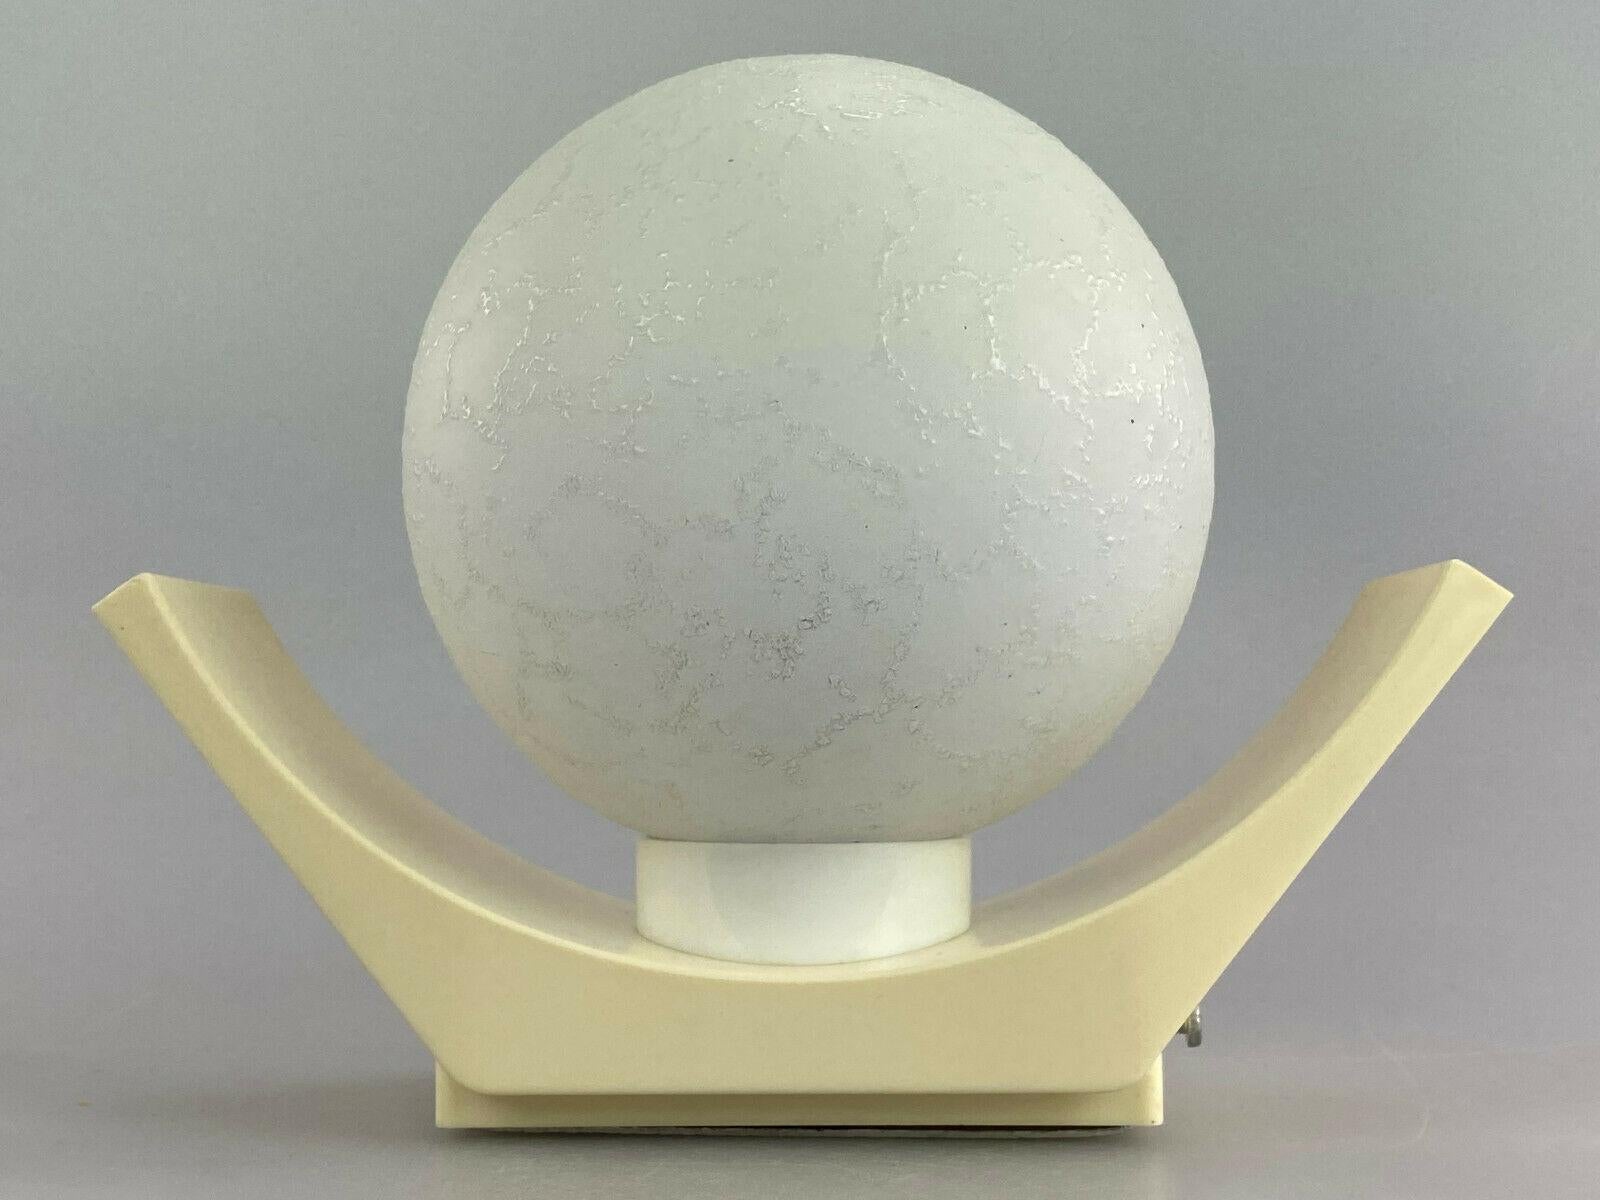 60s 70s Wall Lamp Ball Lamp Lamp Light Space Age Design In Good Condition For Sale In Neuenkirchen, NI